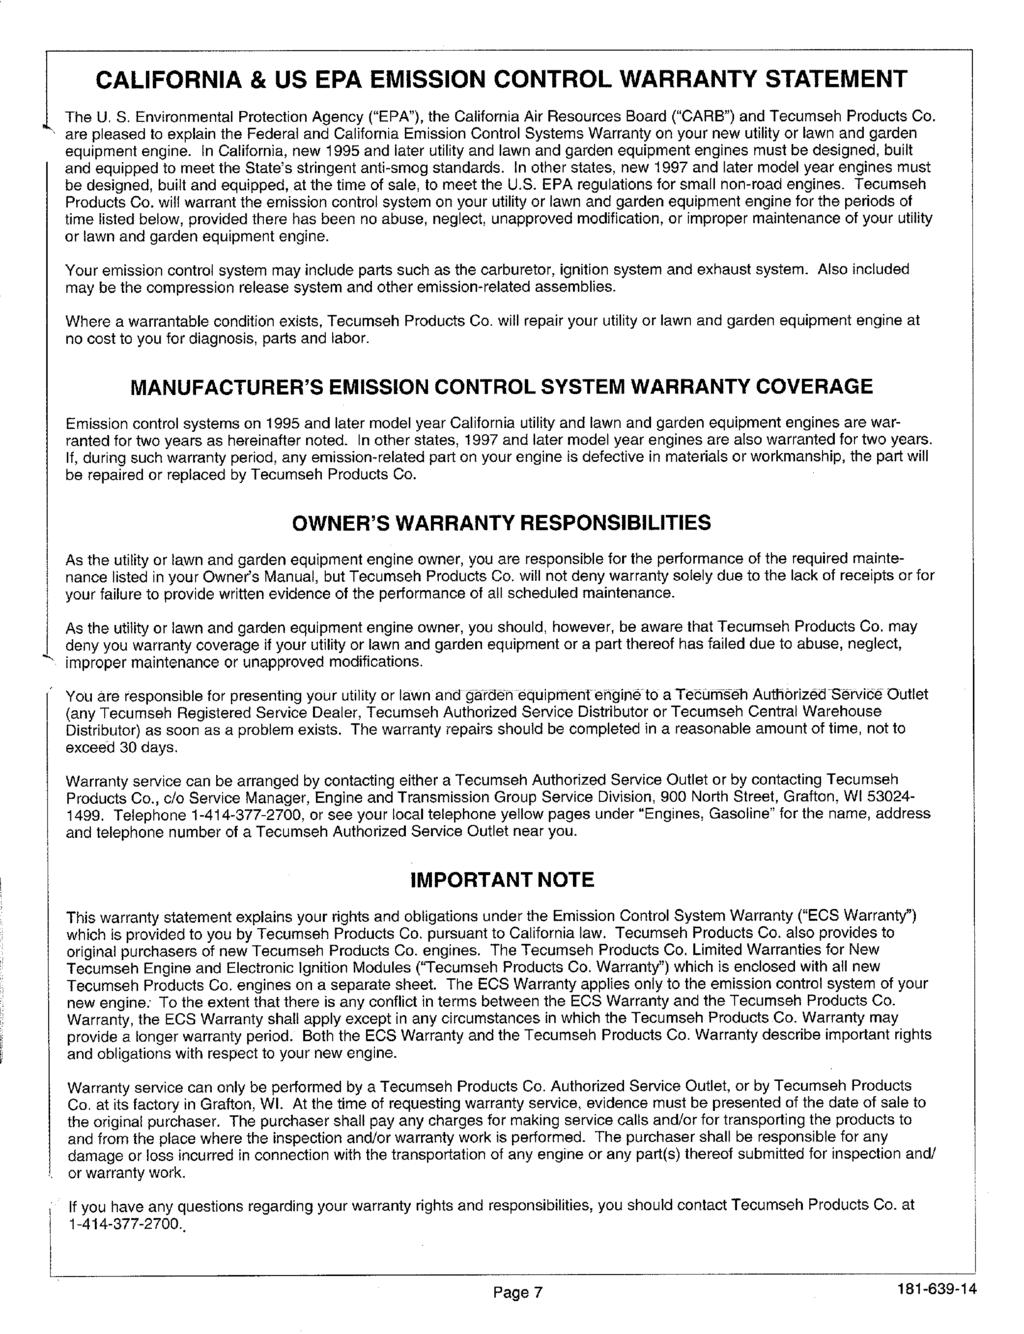 l CALIFORNIA & US EPA EMISSION CONTROL WARRANTY STATEMENT The U. S. Environmental Protection Agency ("EPA"), the California Air Resources Board ("CARB") and Tecumseh Products Co.